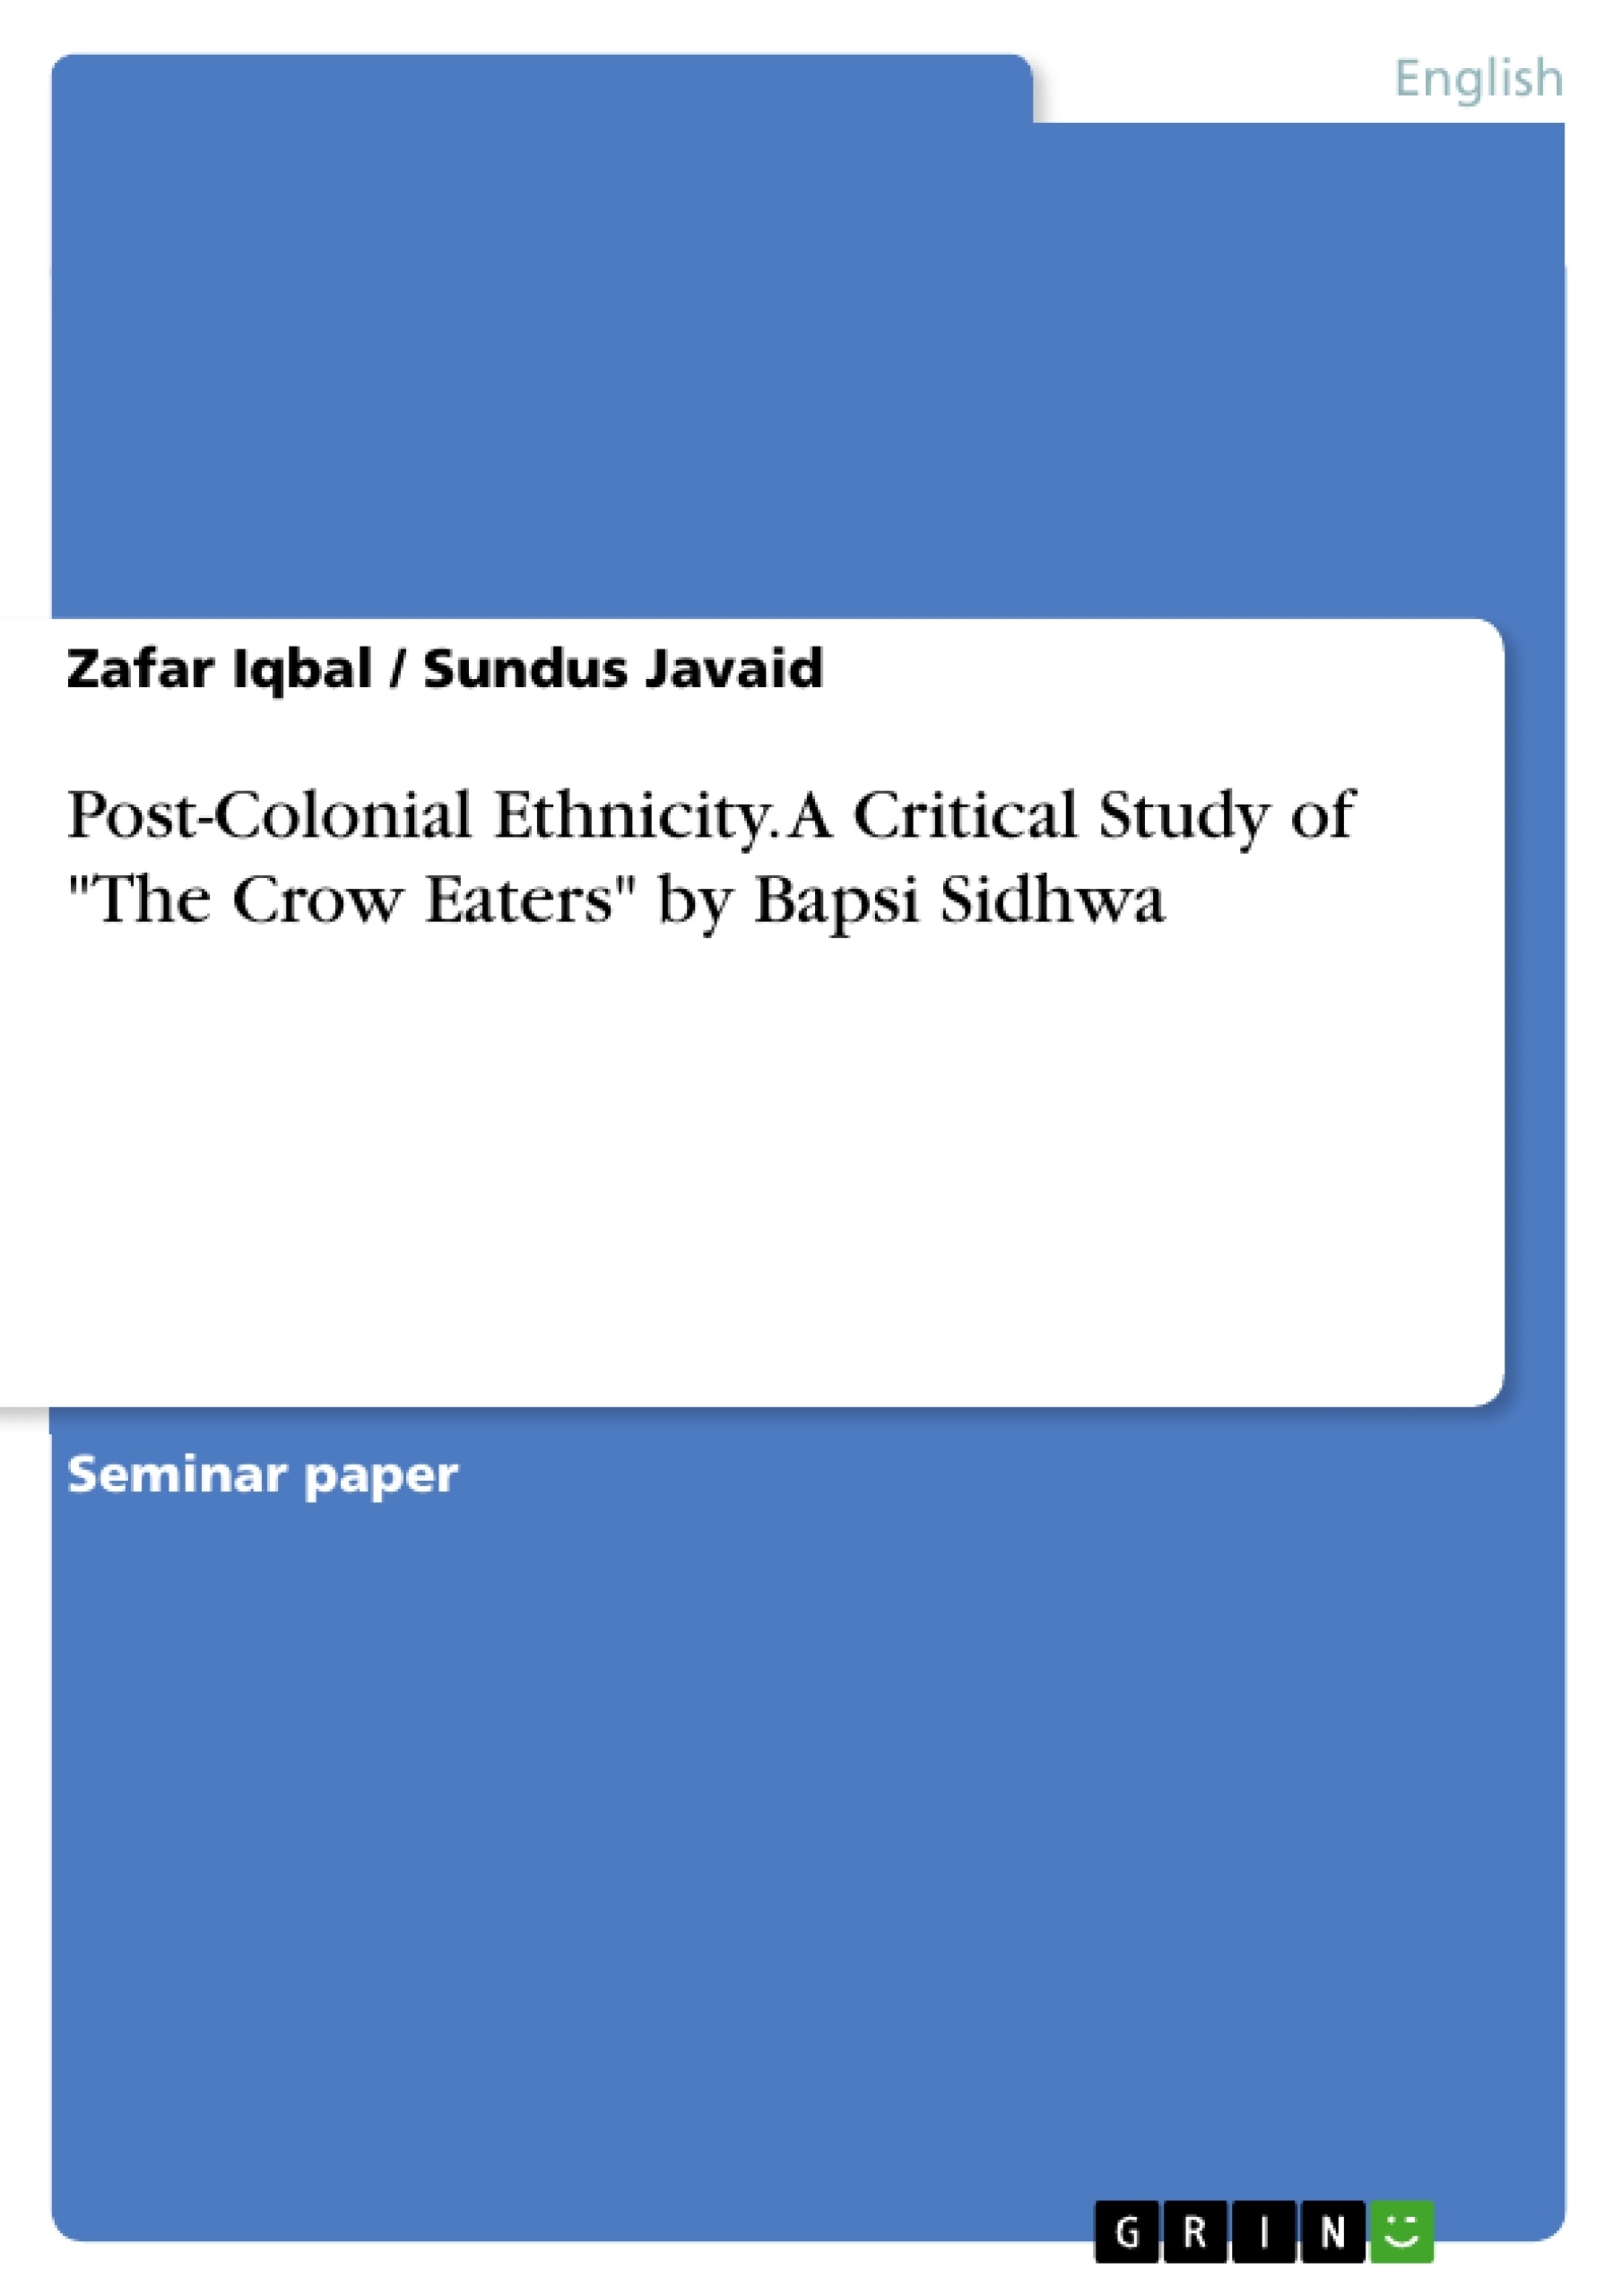 Título: Post-Colonial Ethnicity. A Critical Study of "The Crow Eaters" by Bapsi Sidhwa